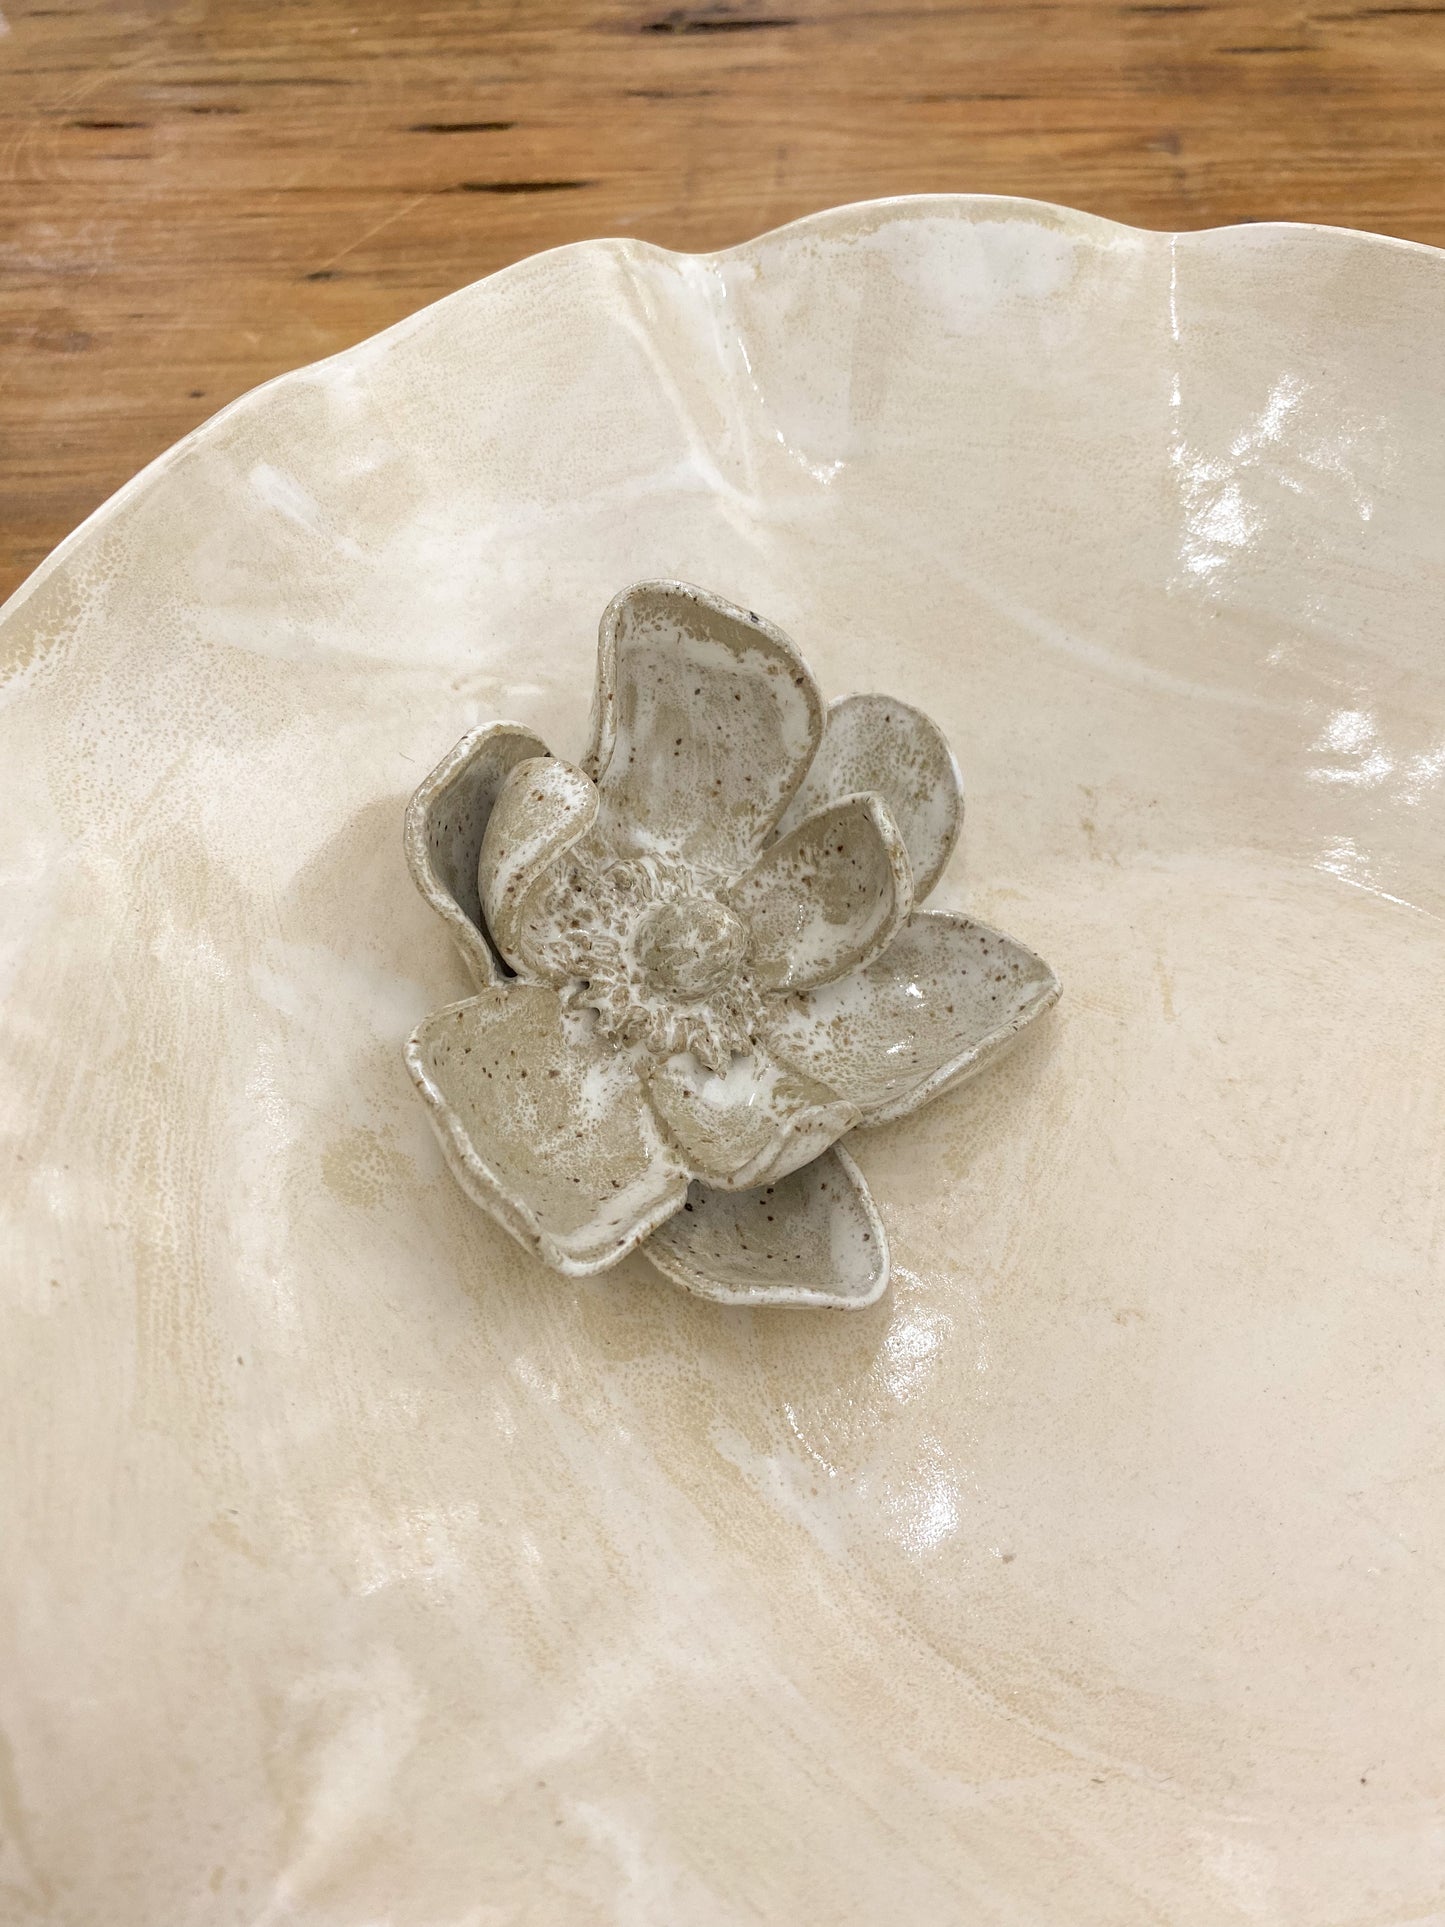 A In Full Bloom Series - Magnolia Sunday Bowl